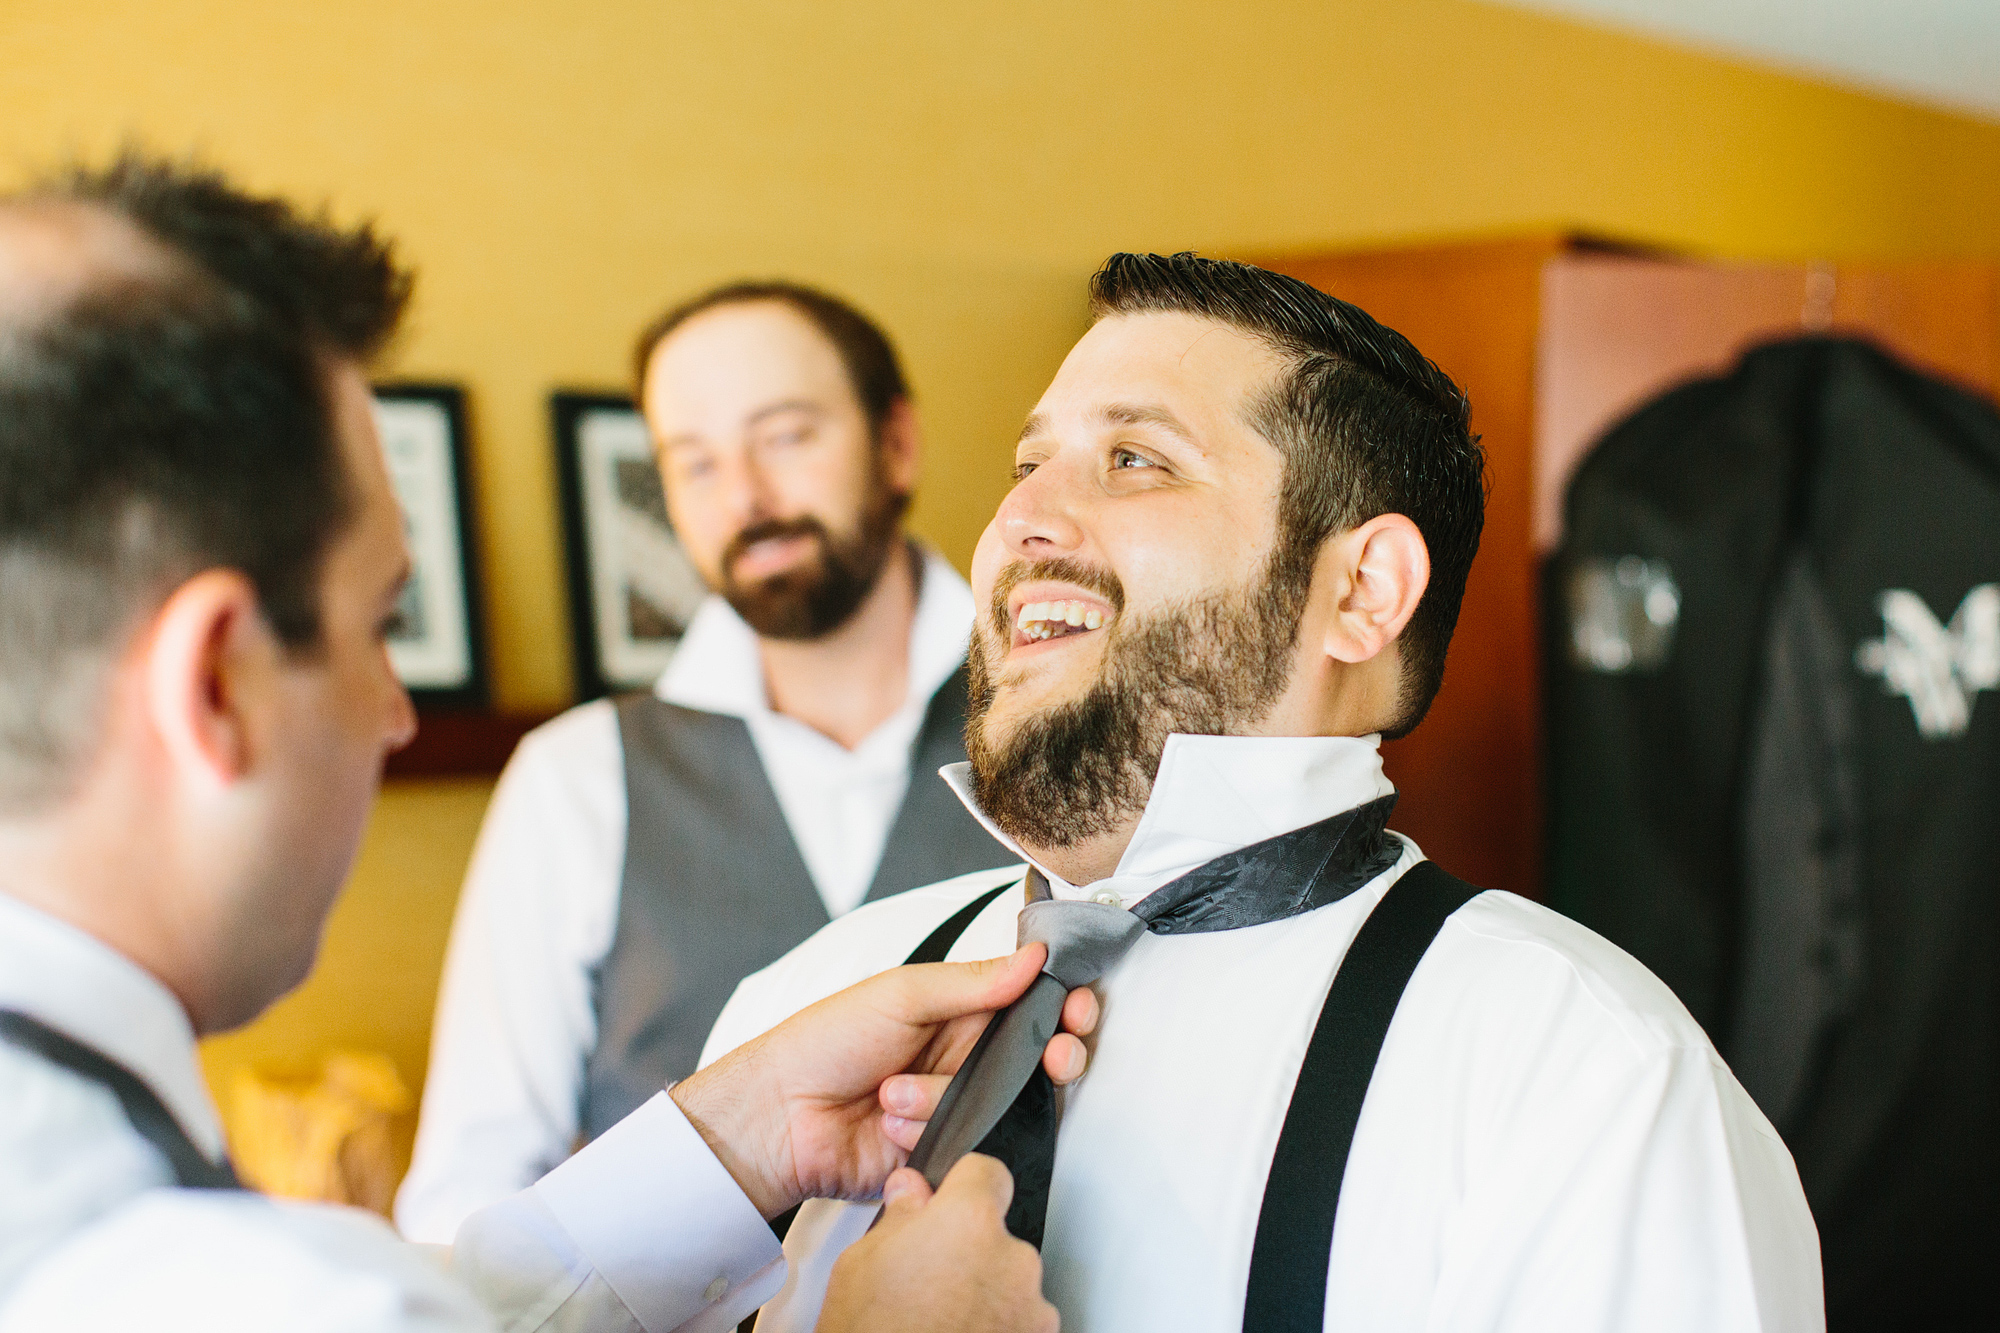 The groom putting his tie on. 